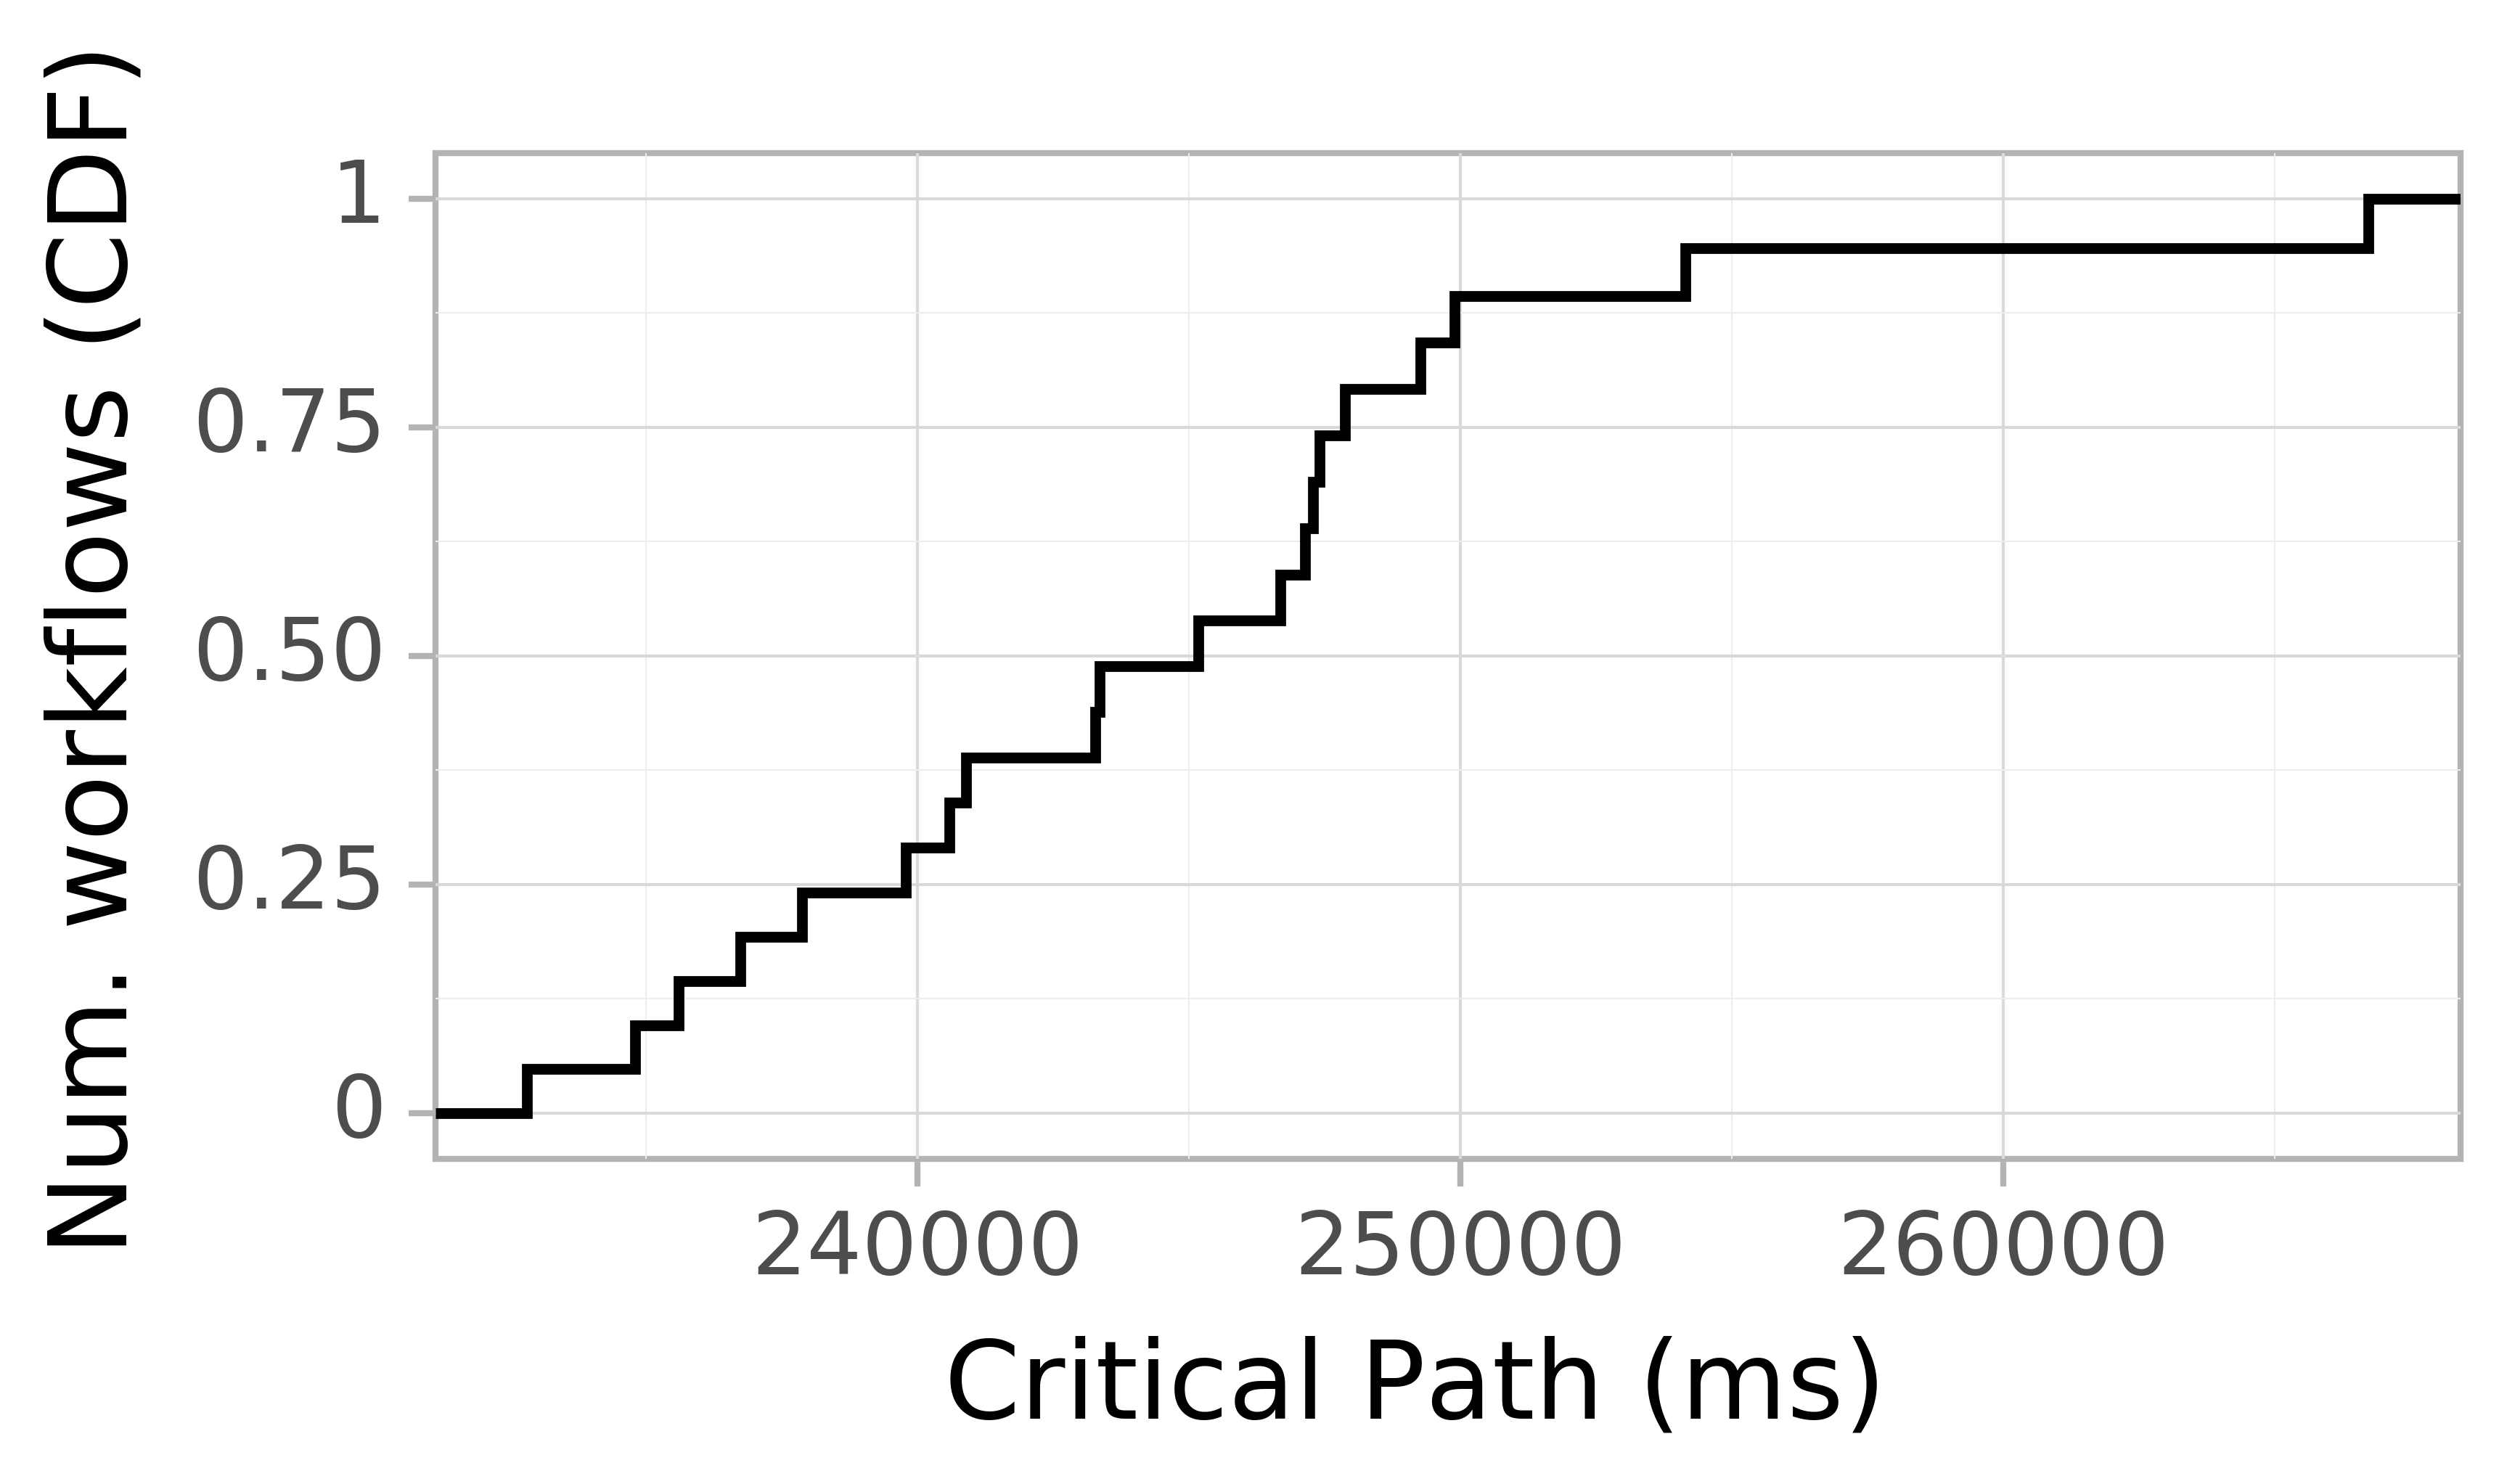 Job runtime CDF graph for the askalon-new_ee21 trace.